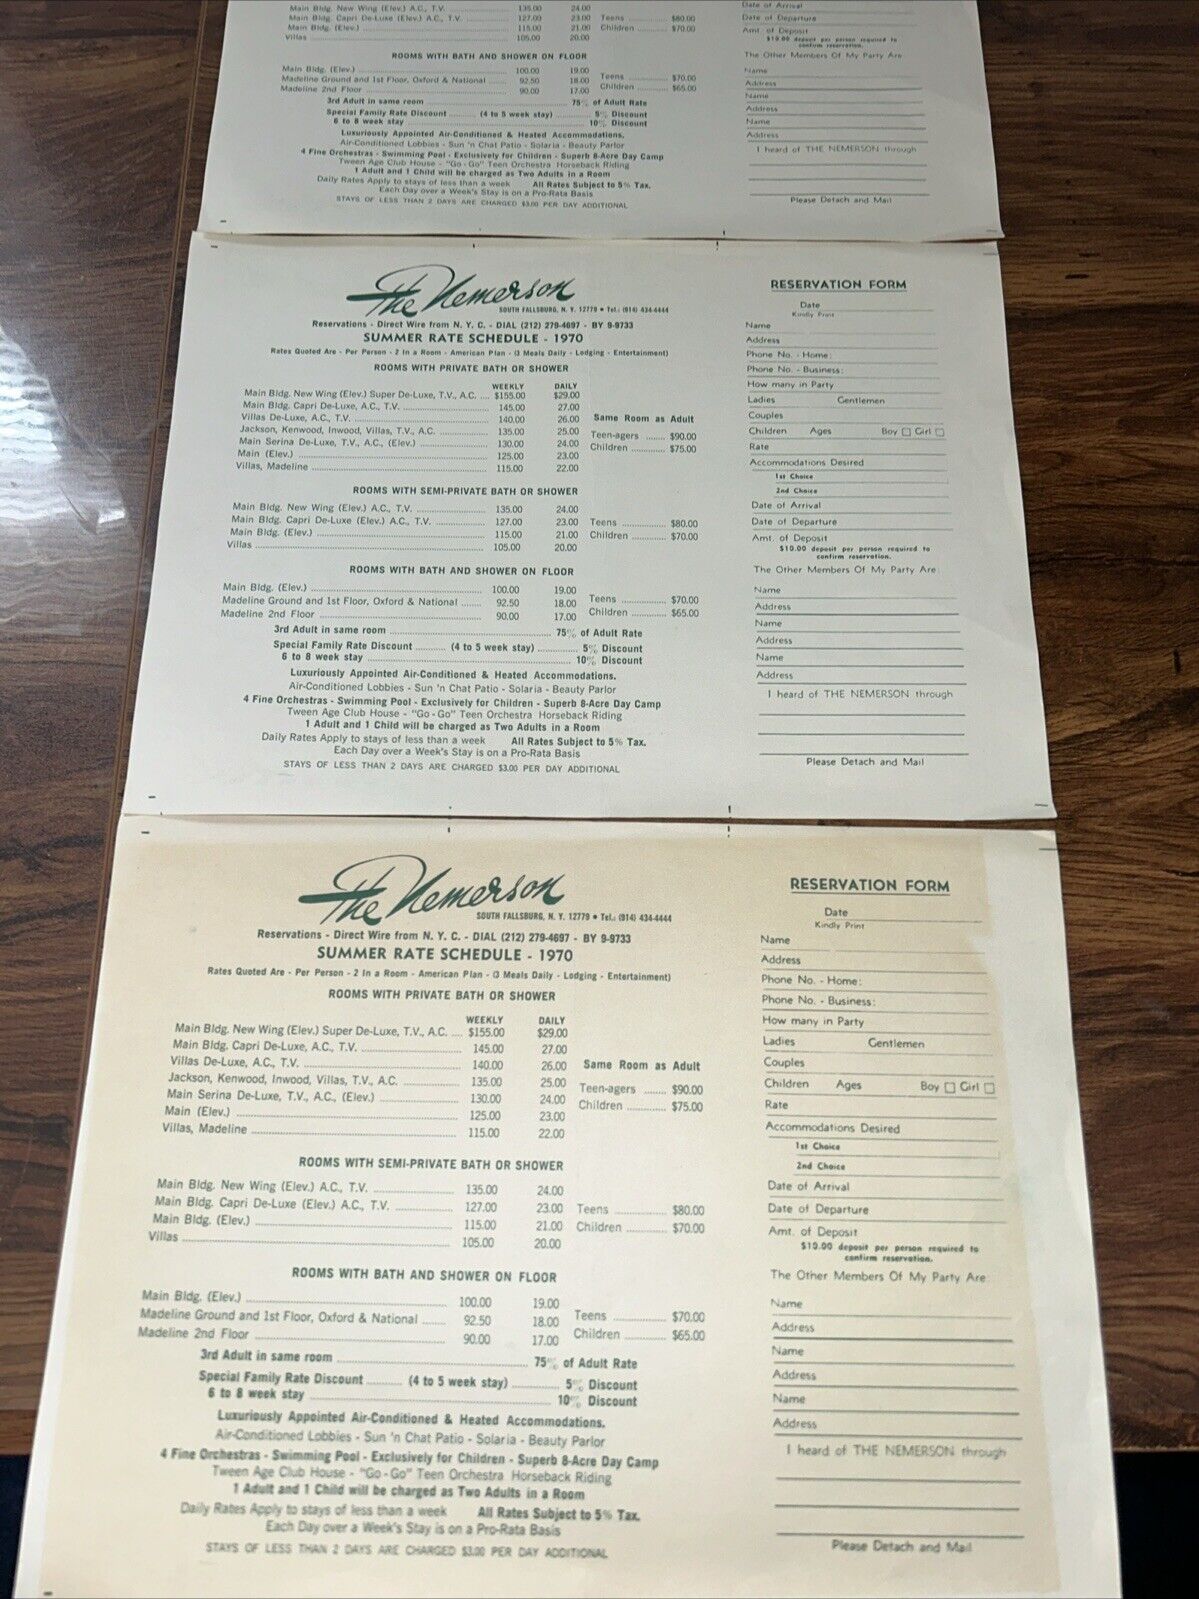 The Nemerson Hotel South Fallsburg NY Reservation Form 1970 Set of 3